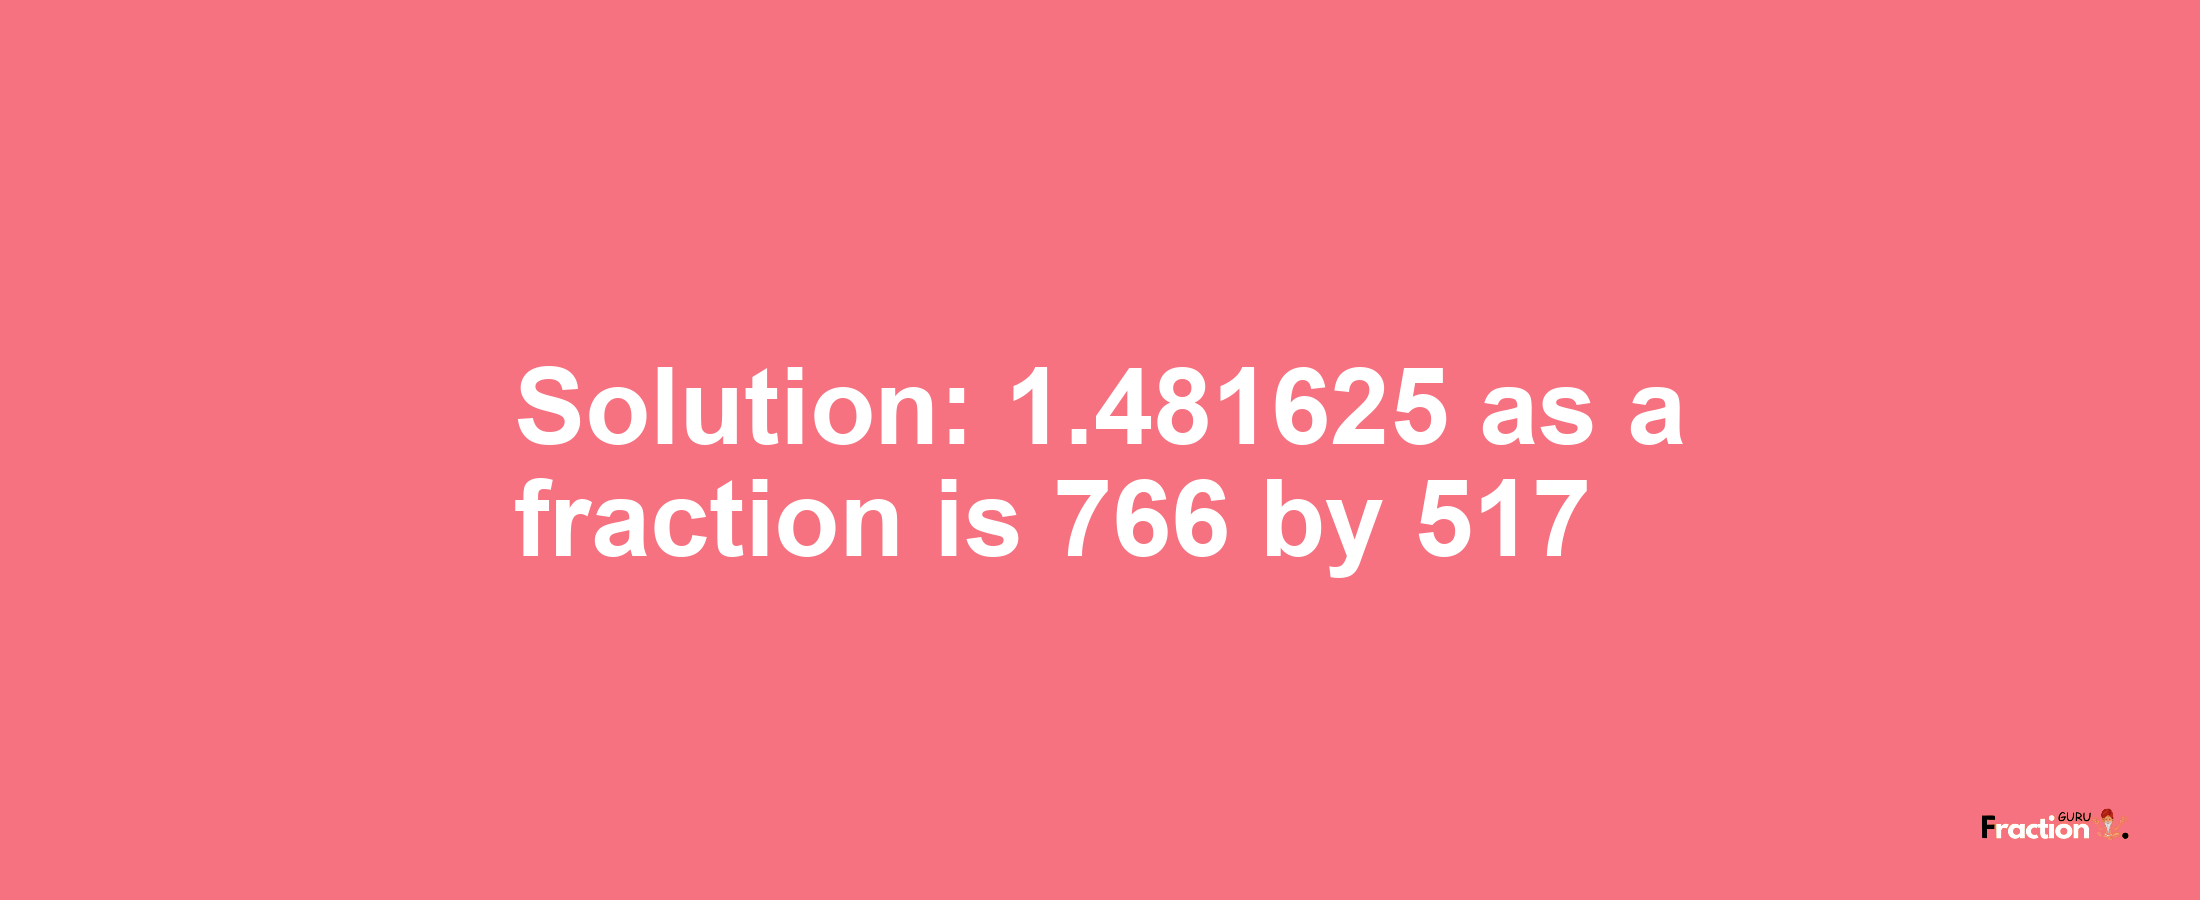 Solution:1.481625 as a fraction is 766/517